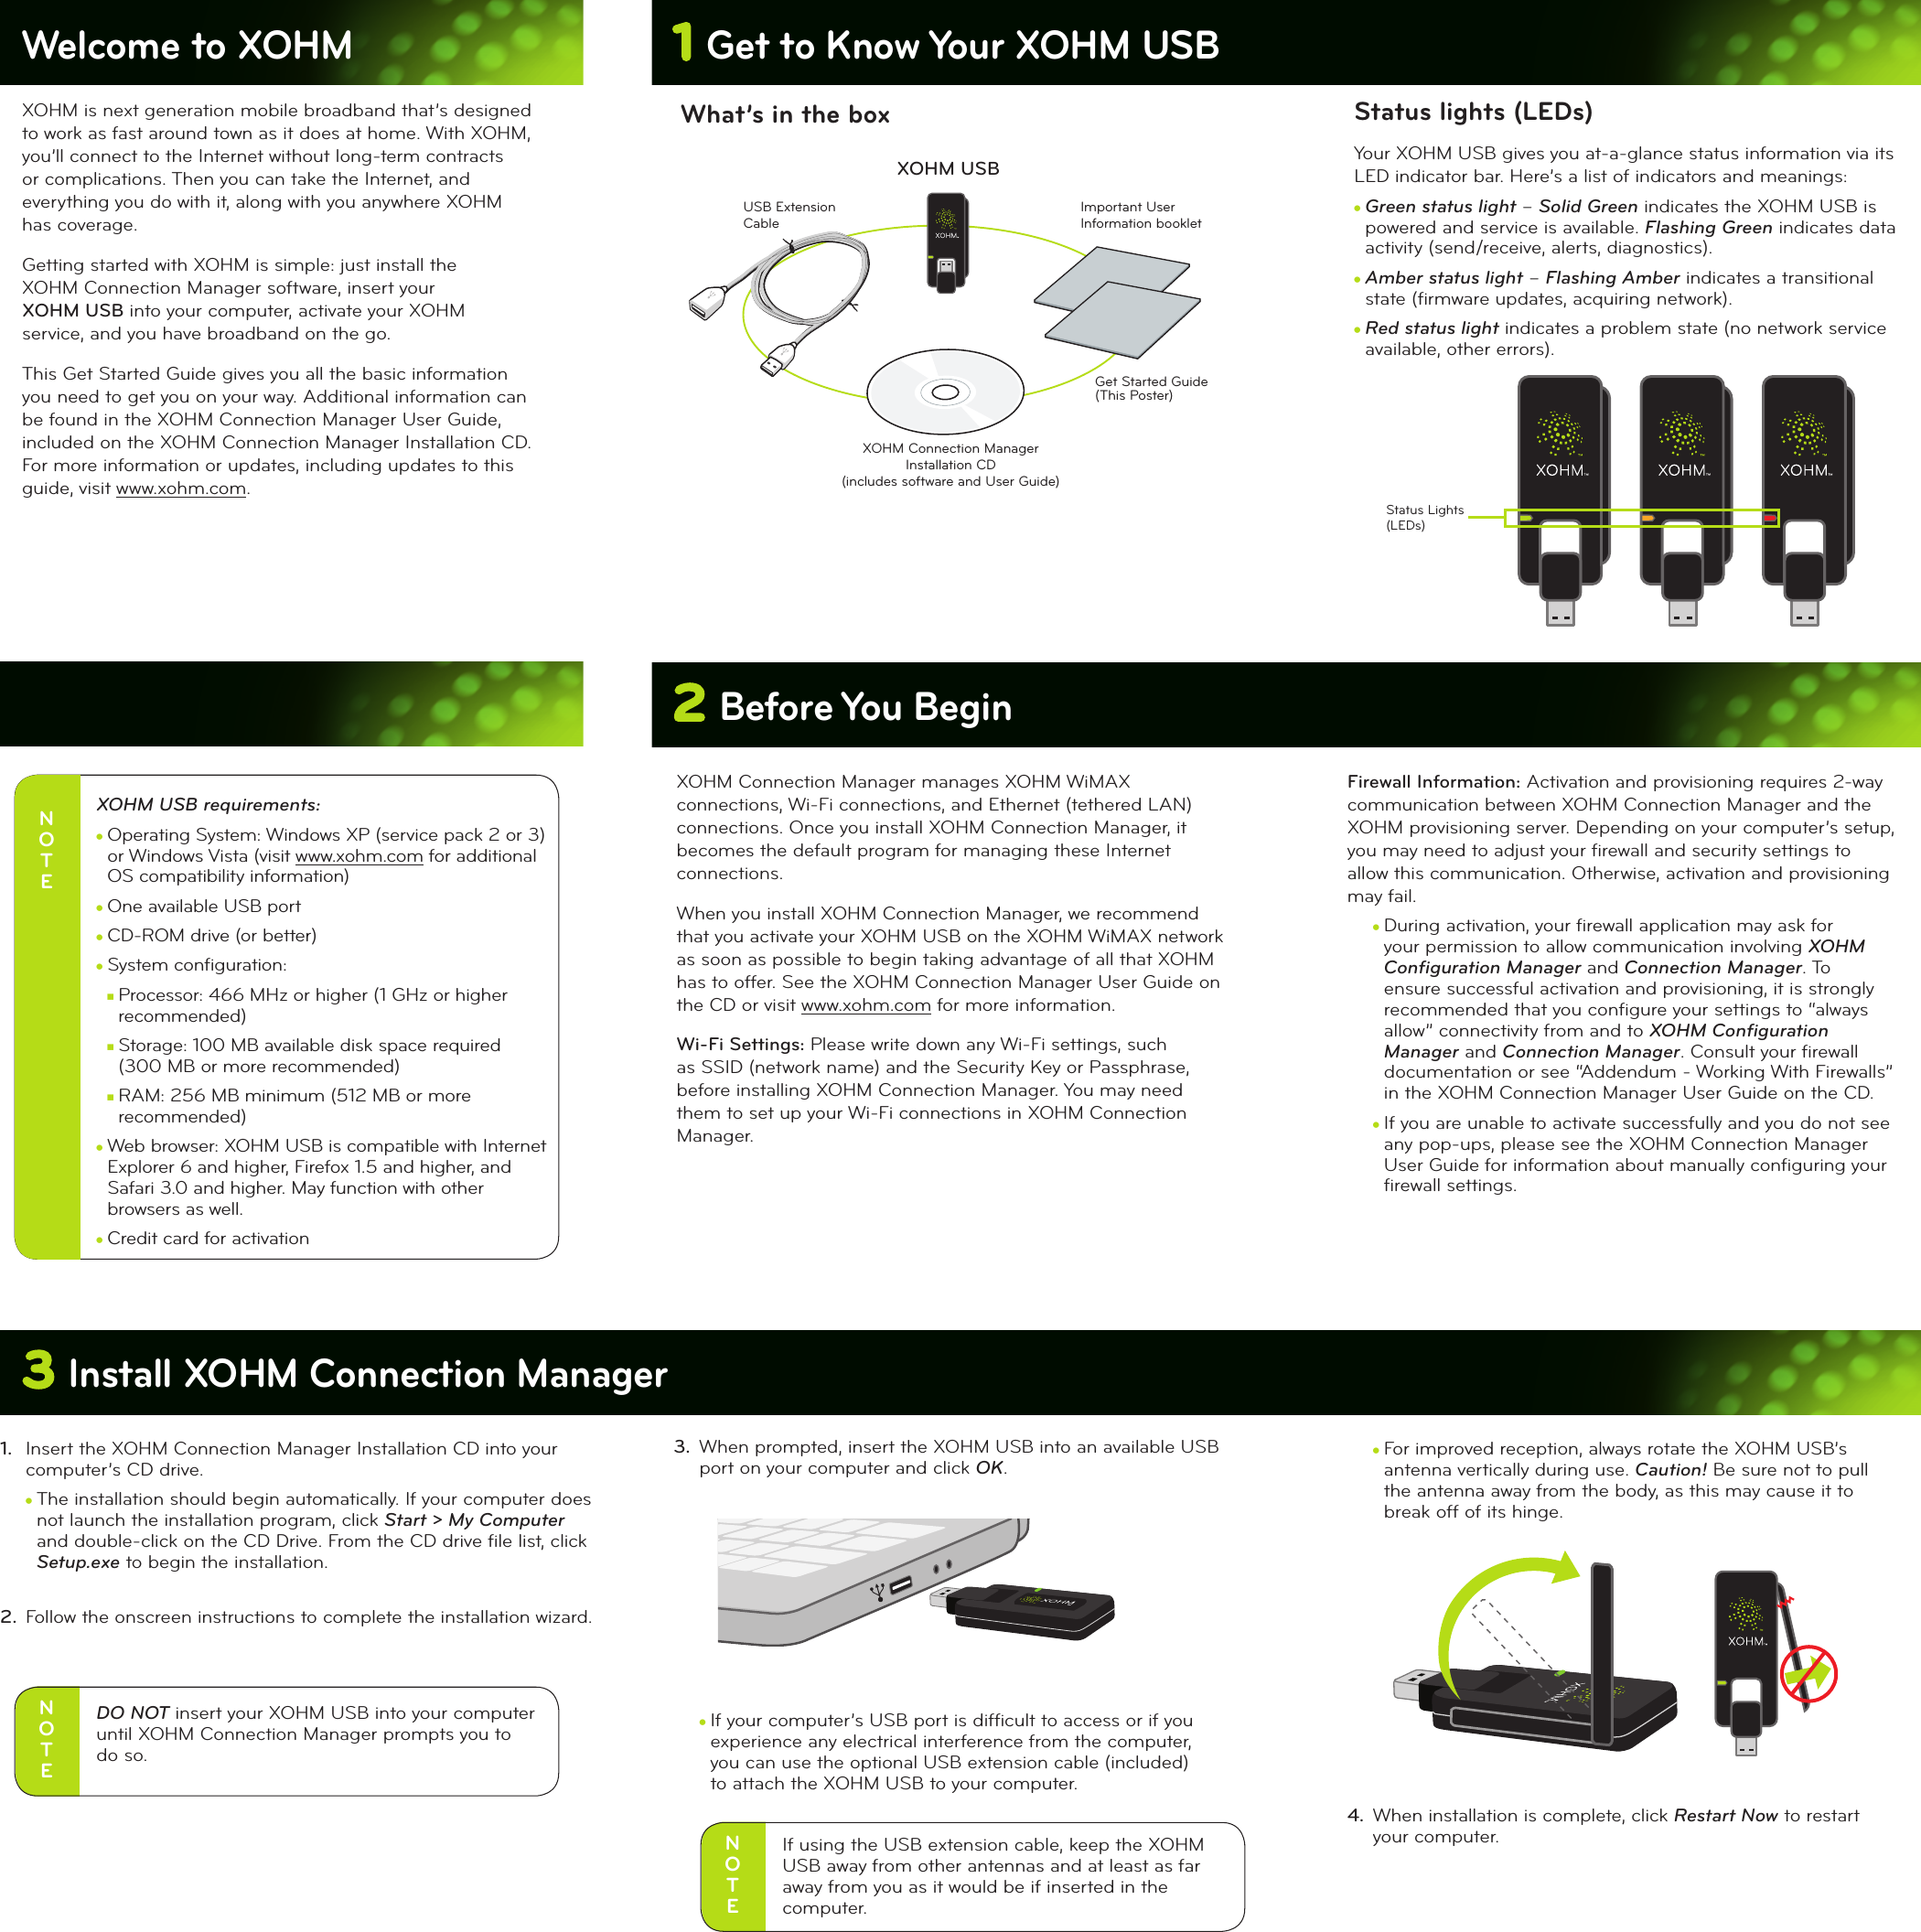 1 Get to Know Your XOHM USBWelcome to XOHM XOHM is next generation mobile broadband that’s designed to work as fast around town as it does at home. With XOHM, you’ll connect to the Internet without long-term contracts or complications. Then you can take the Internet, and everything you do with it, along with you anywhere XOHM has coverage. Getting started with XOHM is simple: just install the  XOHM Connection Manager software, insert your  XOHM USB into your computer, activate your XOHM service, and you have broadband on the go. This Get Started Guide gives you all the basic information you need to get you on your way. Additional information can be found in the XOHM Connection Manager User Guide, included on the XOHM Connection Manager Installation CD. For more information or updates, including updates to this guide, visit www.xohm.com.2 Before You BeginWhat’s in the boxN O T EXOHM USB requirements: cOperating System: Windows XP (service pack 2 or 3) or Windows Vista (visit www.xohm.com for additional OS compatibility information)cOne available USB portcCD-ROM drive (or better)cSystem conﬁguration:nProcessor: 466 MHz or higher (1 GHz or higher recommended)nStorage: 100 MB available disk space required  (300 MB or more recommended)nRAM: 256 MB minimum (512 MB or more recommended)cWeb browser: XOHM USB is compatible with Internet Explorer 6 and higher, Firefox 1.5 and higher, and Safari 3.0 and higher. May function with other browsers as well.cCredit card for activationXOHM Connection Manager manages XOHM WiMAX connections, Wi-Fi connections, and Ethernet (tethered LAN) connections. Once you install XOHM Connection Manager, it becomes the default program for managing these Internet connections.When you install XOHM Connection Manager, we recommend that you activate your XOHM USB on the XOHM WiMAX network as soon as possible to begin taking advantage of all that XOHM has to offer. See the XOHM Connection Manager User Guide on the CD or visit www.xohm.com for more information.Wi-Fi Settings: Please write down any Wi-Fi settings, such as SSID (network name) and the Security Key or Passphrase, before installing XOHM Connection Manager. You may need them to set up your Wi-Fi connections in XOHM Connection Manager.3 Install XOHM Connection Manager3.  When prompted, insert the XOHM USB into an available USB port on your computer and click OK. cIf your computer’s USB port is difﬁcult to access or if you experience any electrical interference from the computer, you can use the optional USB extension cable (included)  to attach the XOHM USB to your computer.1.  Insert the XOHM Connection Manager Installation CD into your computer’s CD drive.cThe installation should begin automatically. If your computer does not launch the installation program, click Start &gt; My Computer  and double-click on the CD Drive. From the CD drive ﬁle list, click Setup.exe to begin the installation.2.  Follow the onscreen instructions to complete the installation wizard.XOHM USBXOHM Connection ManagerInstallation CD(includes software and User Guide)Get Started Guide(This Poster)USB ExtensionCableImportant UserInformation bookletStatus lights (LEDs)Your XOHM USB gives you at-a-glance status information via its LED indicator bar. Here’s a list of indicators and meanings: cGreen status light – Solid Green indicates the XOHM USB is powered and service is available. Flashing Green indicates data activity (send/receive, alerts, diagnostics).cAmber status light – Flashing Amber indicates a transitional state (ﬁrmware updates, acquiring network).cRed status light indicates a problem state (no network service available, other errors). Firewall Information: Activation and provisioning requires 2-way communication between XOHM Connection Manager and the XOHM provisioning server. Depending on your computer’s setup, you may need to adjust your ﬁrewall and security settings to allow this communication. Otherwise, activation and provisioning may fail.cDuring activation, your ﬁrewall application may ask for your permission to allow communication involving XOHM Conﬁguration Manager and Connection Manager. To ensure successful activation and provisioning, it is strongly recommended that you conﬁgure your settings to “always allow” connectivity from and to XOHM Conﬁguration Manager and Connection Manager. Consult your ﬁrewall documentation or see “Addendum - Working With Firewalls” in the XOHM Connection Manager User Guide on the CD.cIf you are unable to activate successfully and you do not see any pop-ups, please see the XOHM Connection Manager User Guide for information about manually conﬁguring your ﬁrewall settings.cFor improved reception, always rotate the XOHM USB’s antenna vertically during use. Caution! Be sure not to pull the antenna away from the body, as this may cause it to break off of its hinge.4.  When installation is complete, click Restart Now to restart your computer.Status Lights(LEDs)N O T EDO NOT insert your XOHM USB into your computer until XOHM Connection Manager prompts you to  do so.N O T EIf using the USB extension cable, keep the XOHM USB away from other antennas and at least as far  away from you as it would be if inserted in the computer.